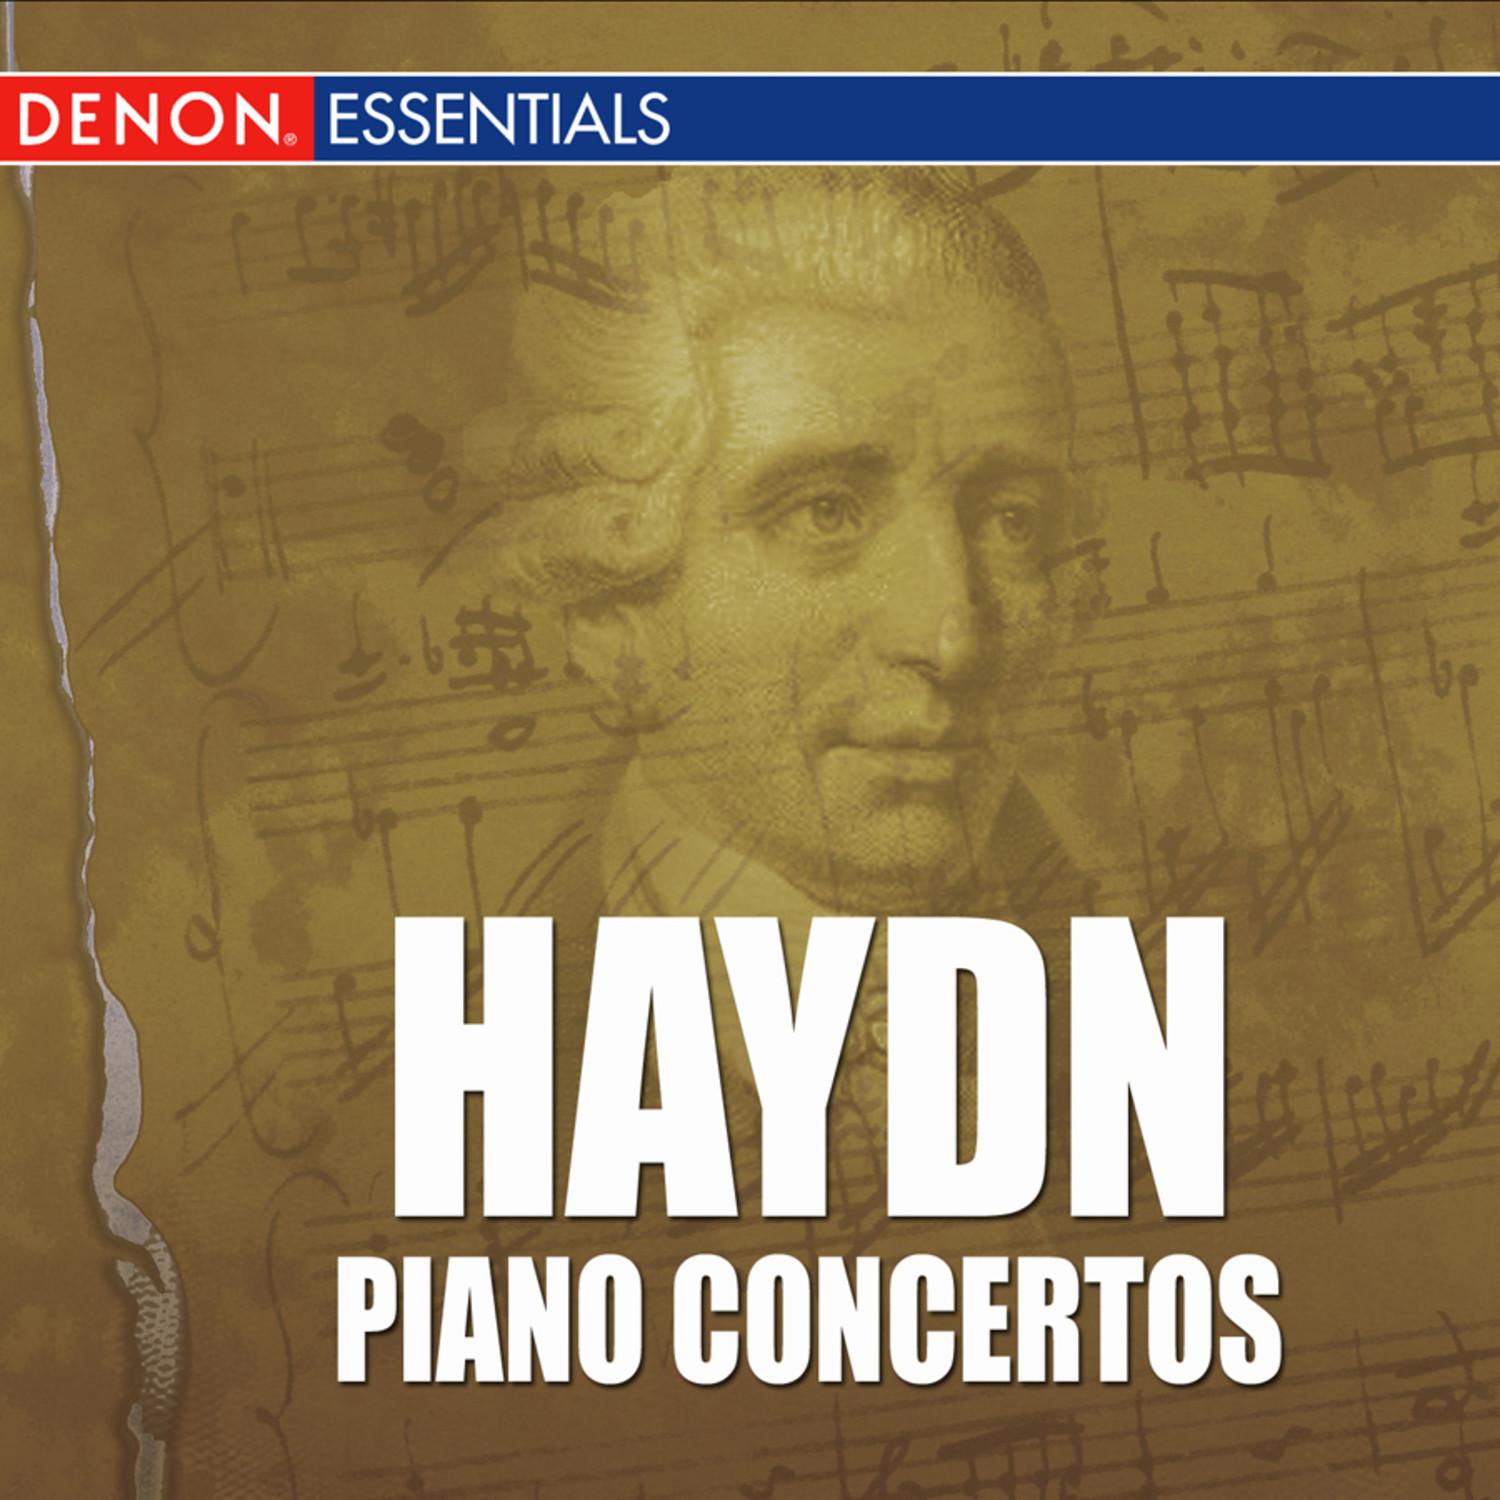 Concerto for Piano and Strings, No. 11 in D Major Hob XVIII:11: III. Rondo all'Ungarese